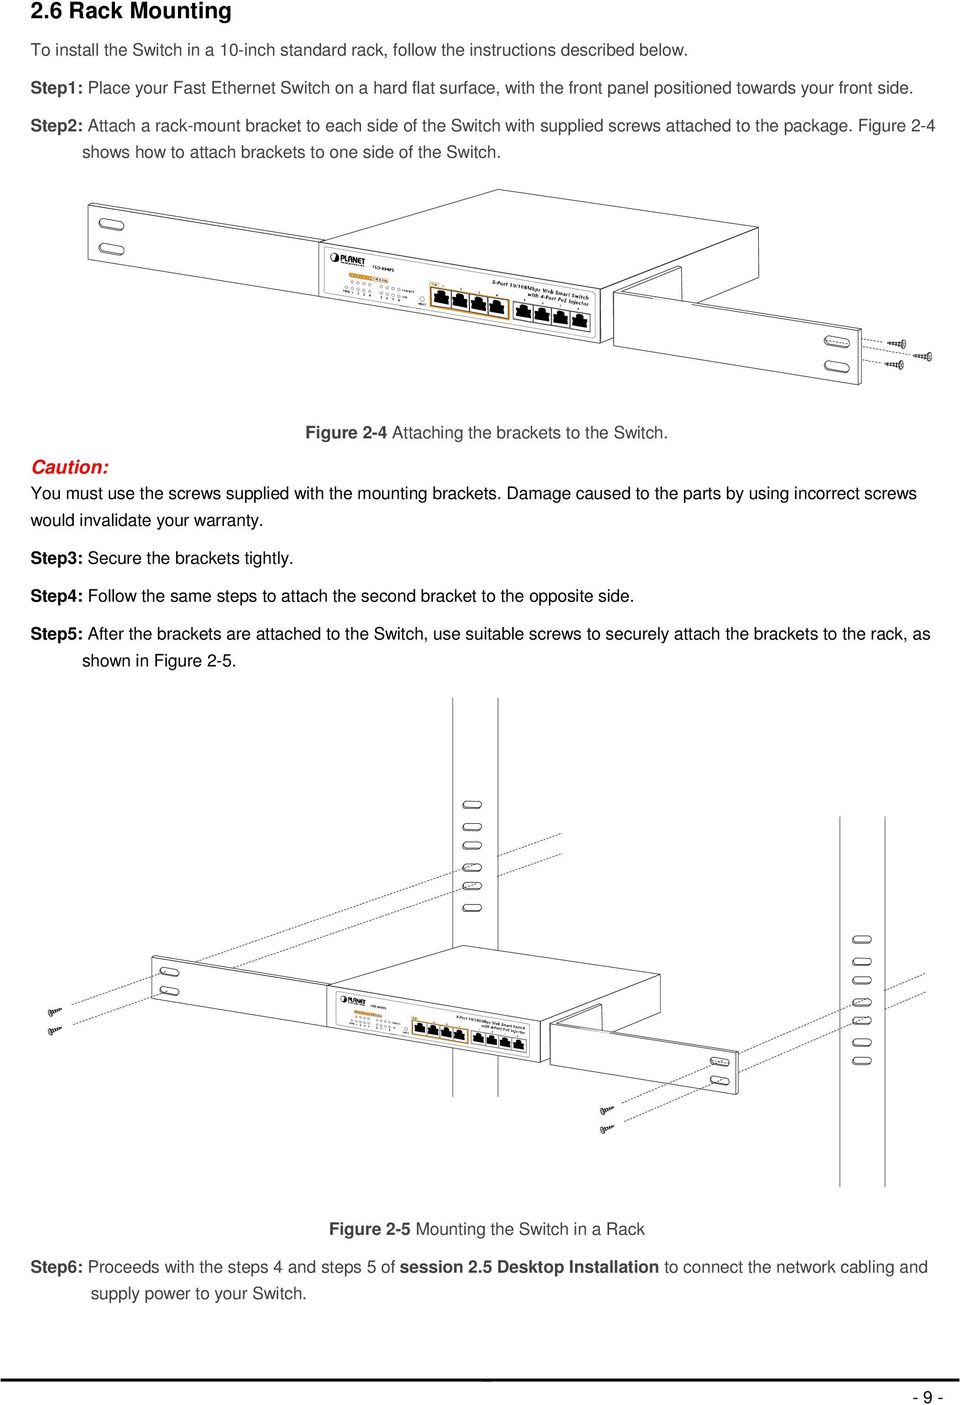 Step2: Attach a rack-mount bracket to each side of the Switch with supplied screws attached to the package. Figure 2-4 shows how to attach brackets to one side of the Switch.